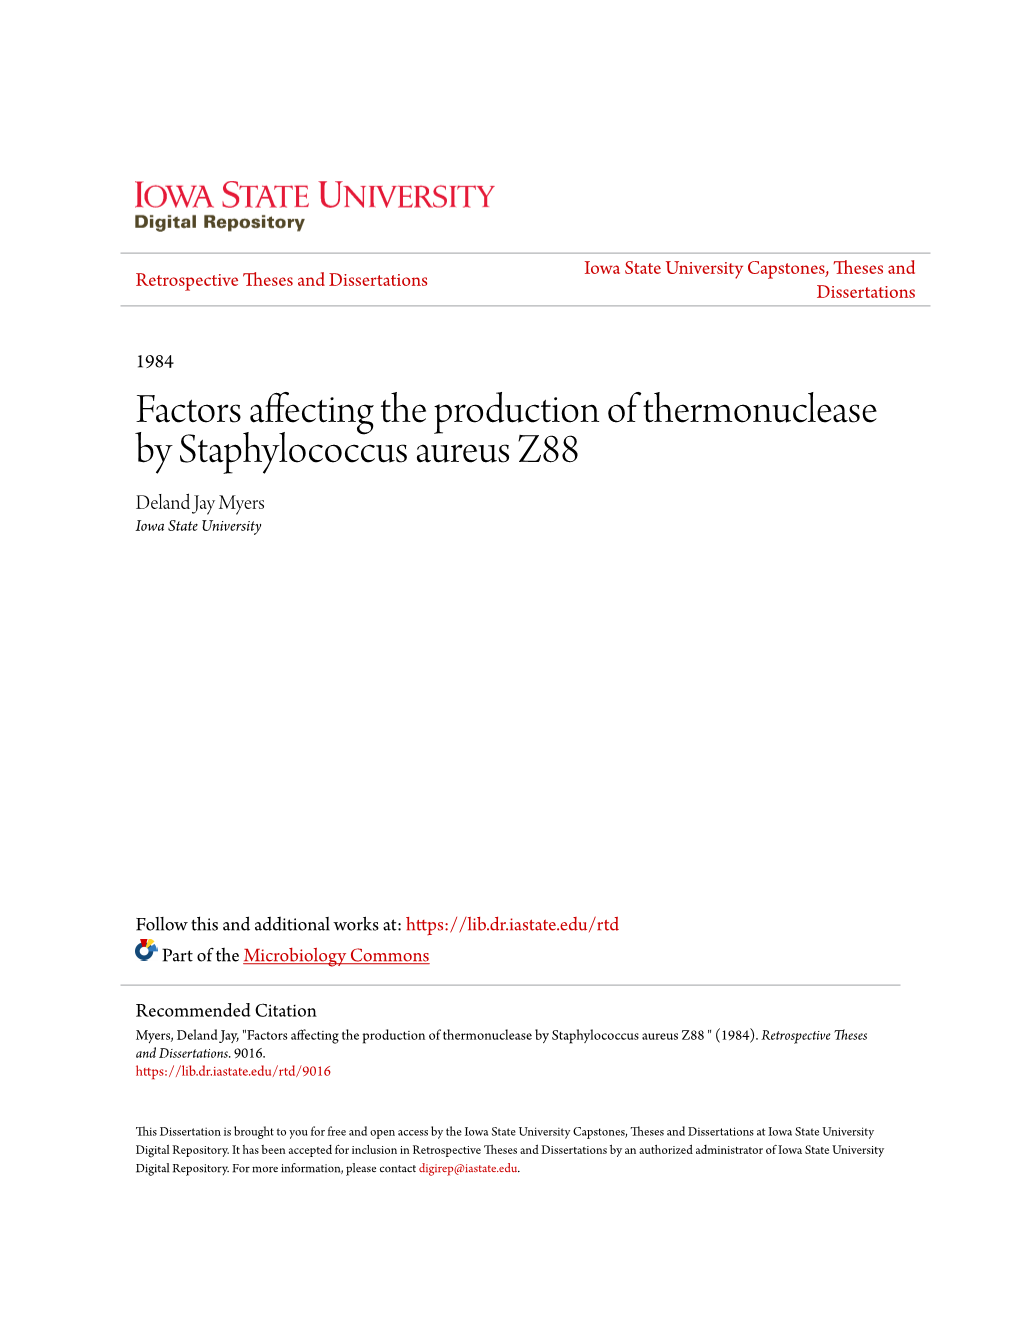 Factors Affecting the Production of Thermonuclease by Staphylococcus Aureus Z88 Deland Jay Myers Iowa State University